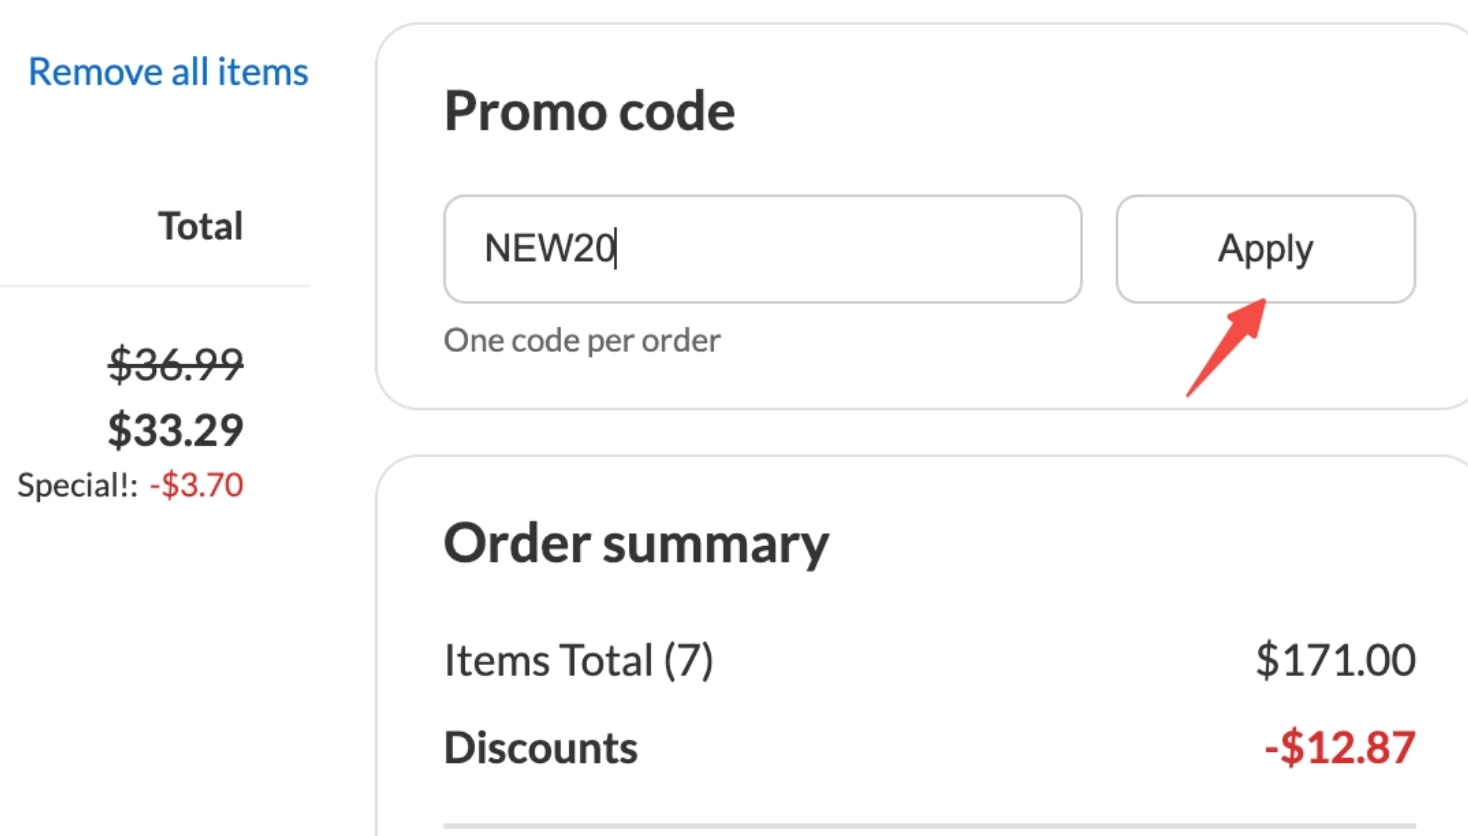 Step 3: When checking out at nextlevelescape.com.au, paste the discount code into the specified promotional code box.